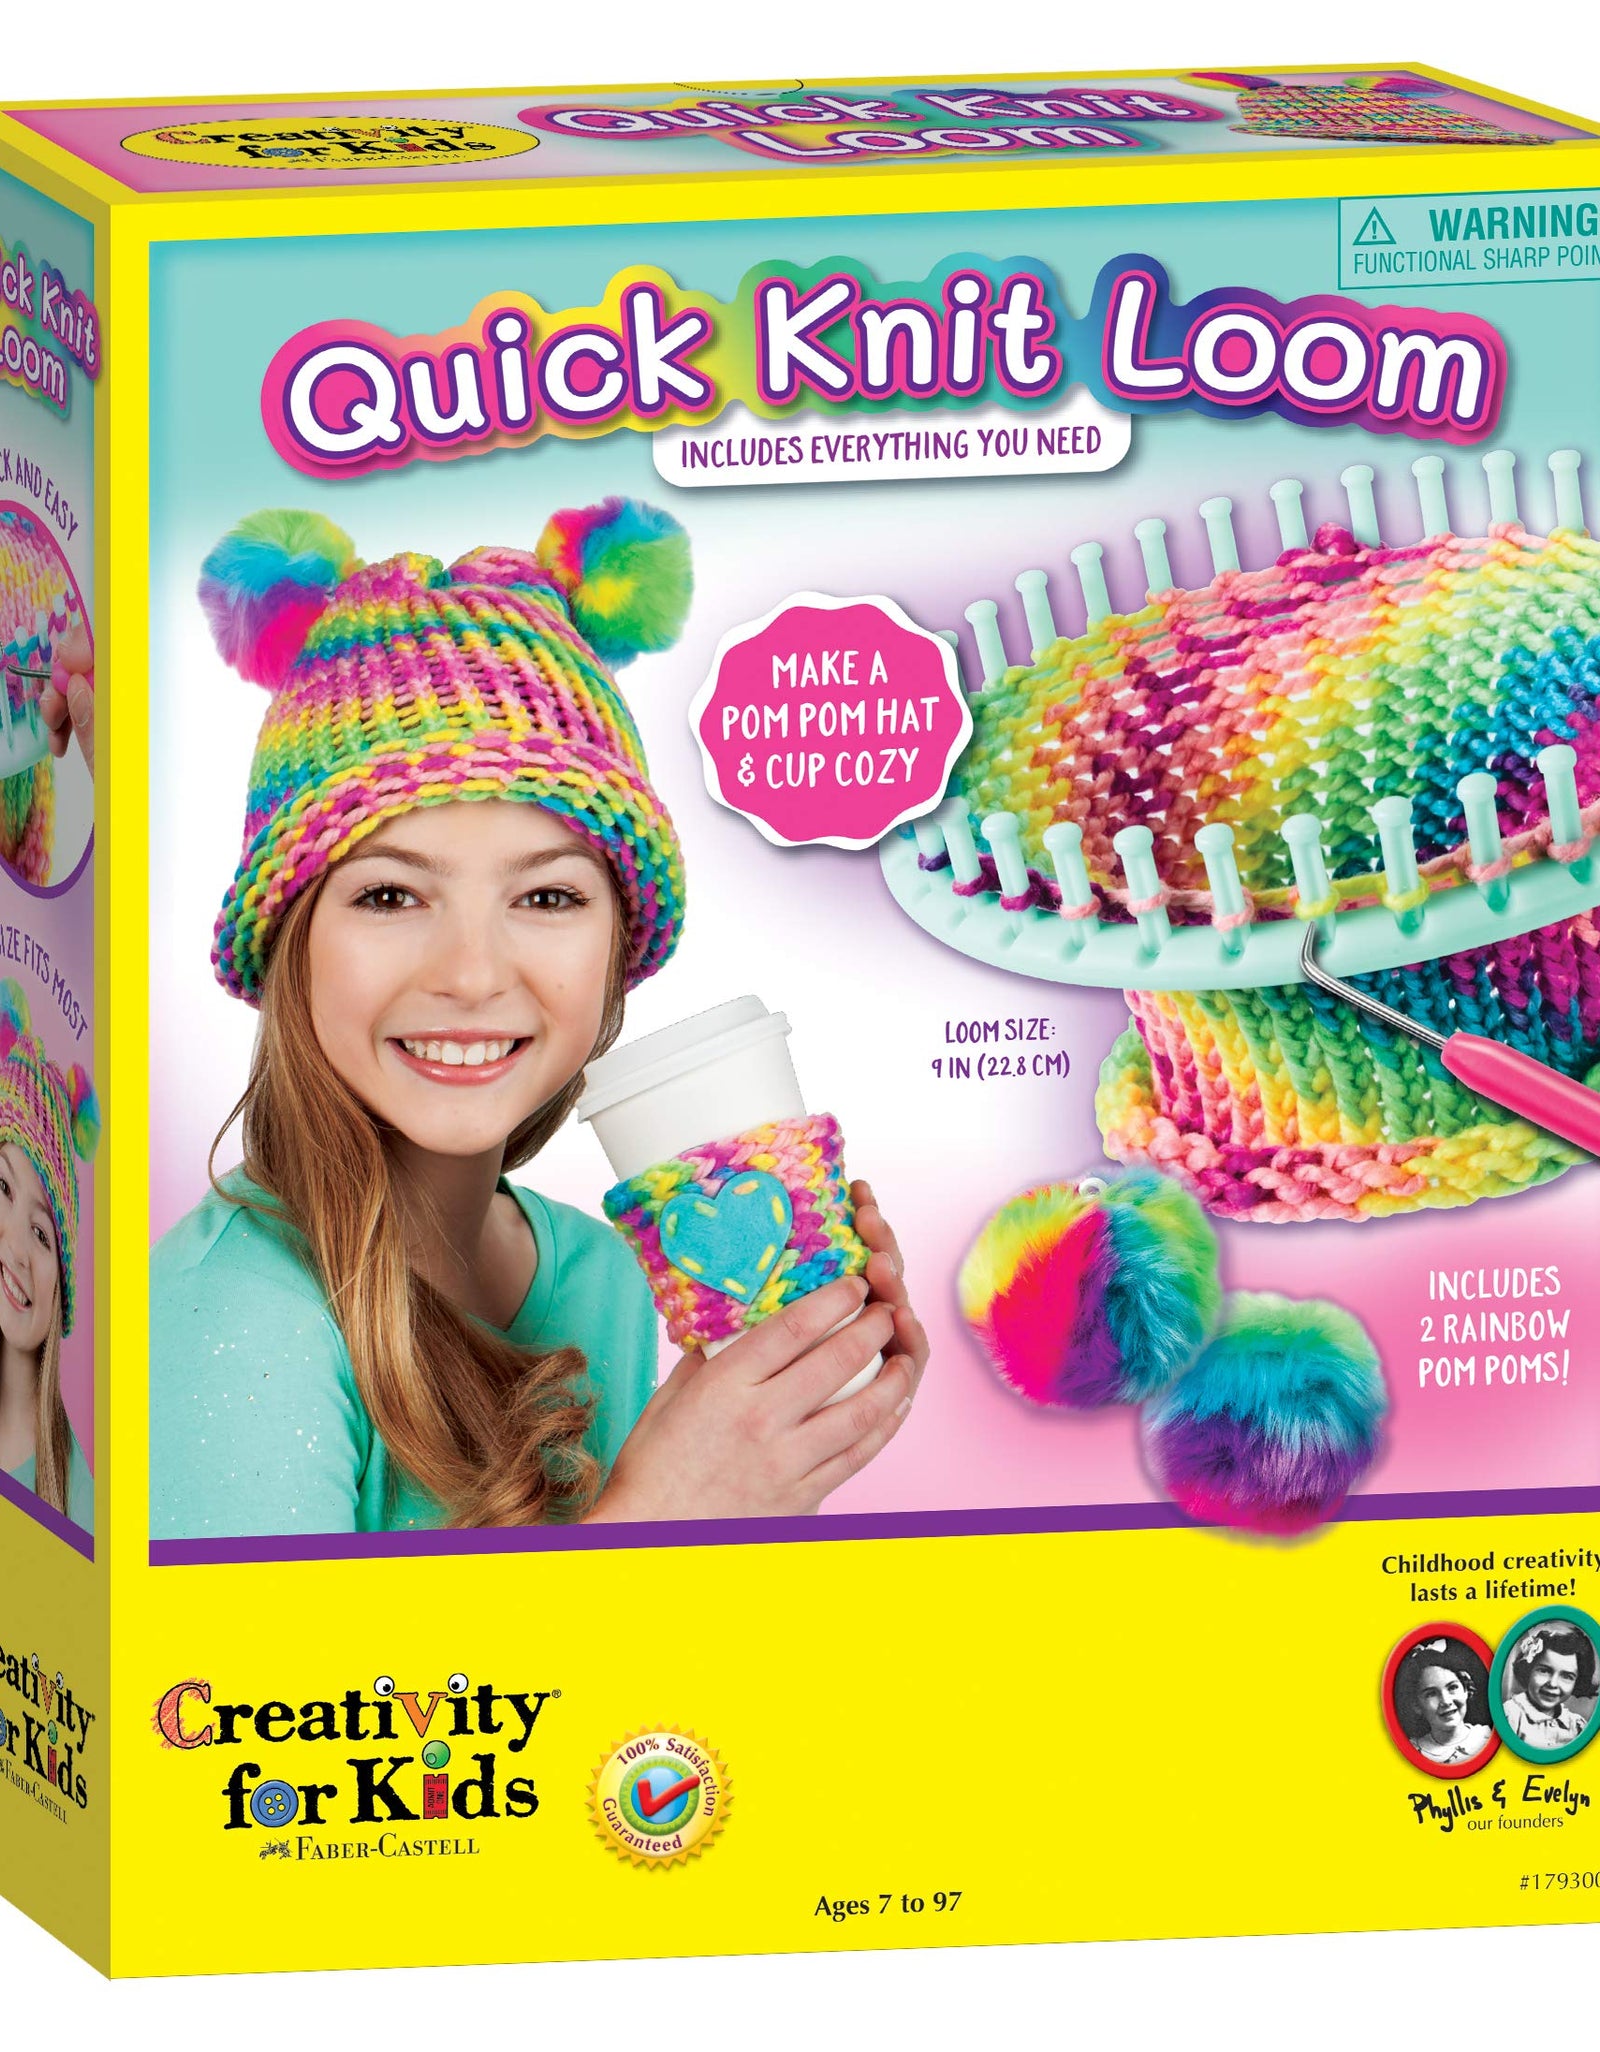 Creativity for Kids Quick Knit Loom – Make Your Own Pom Pom Hat And Accessories For Beginners (Packaging May Vary)